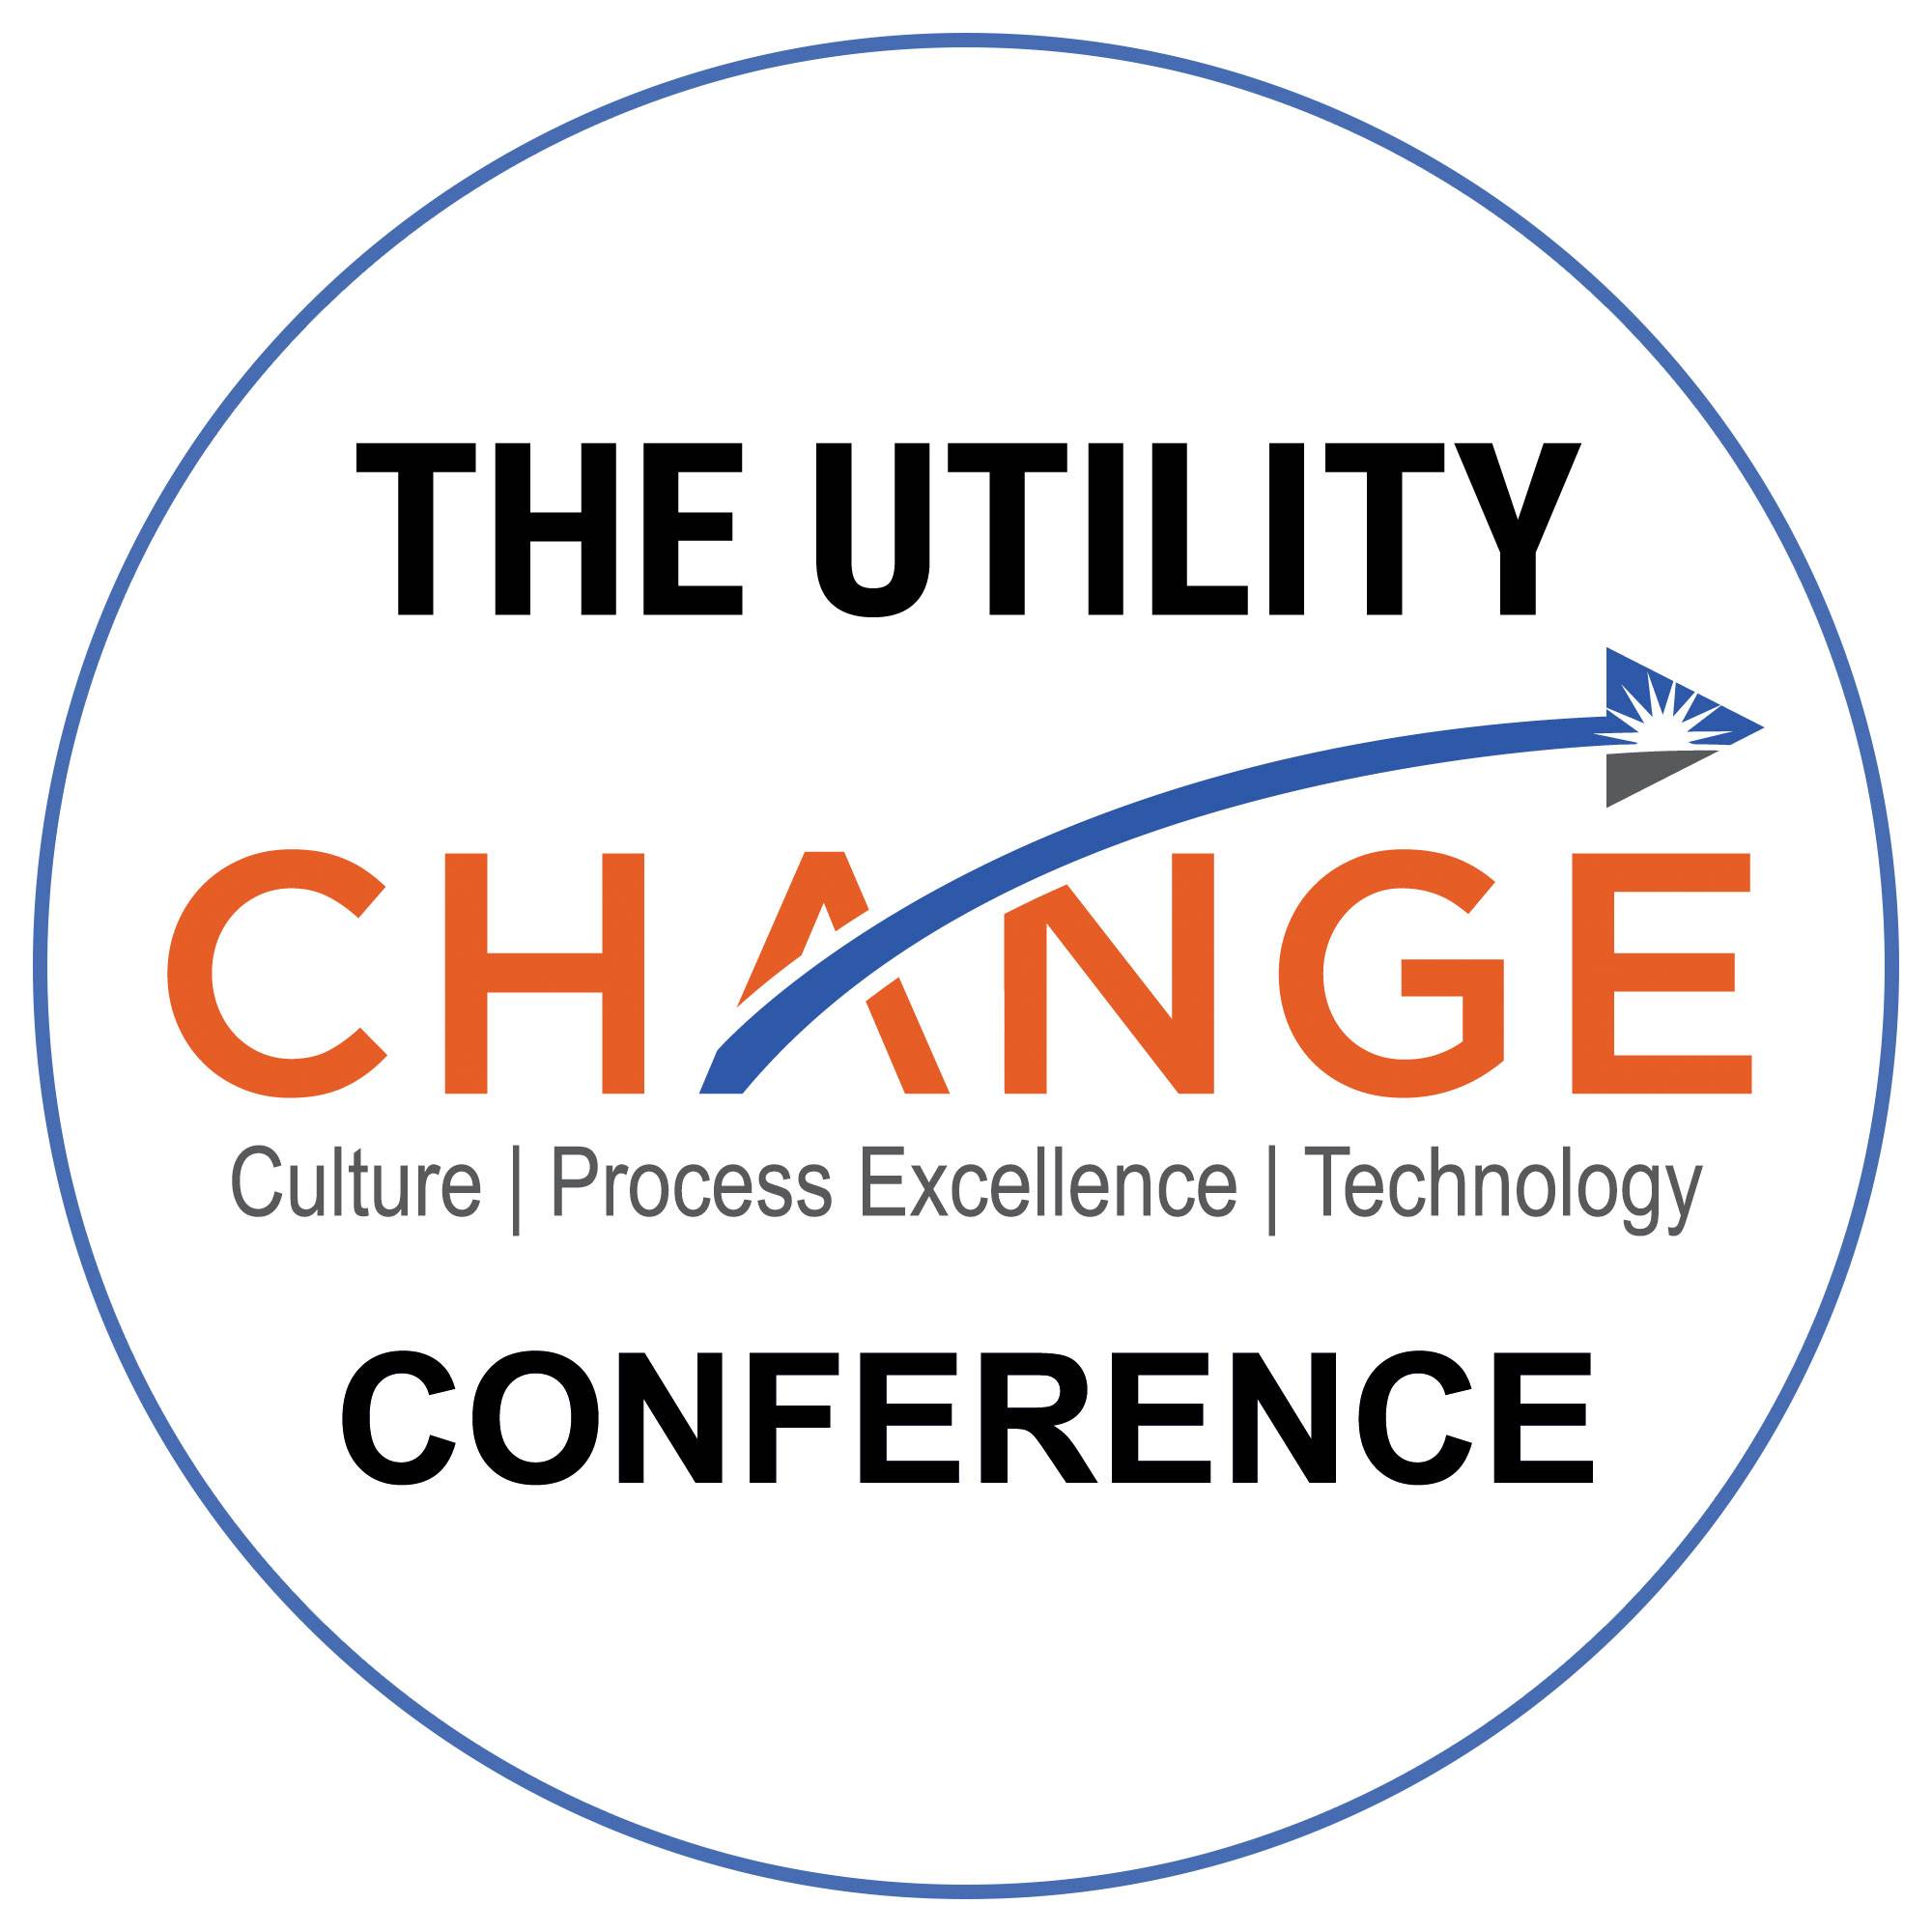 Conferences Connect and UtilityEvents.com